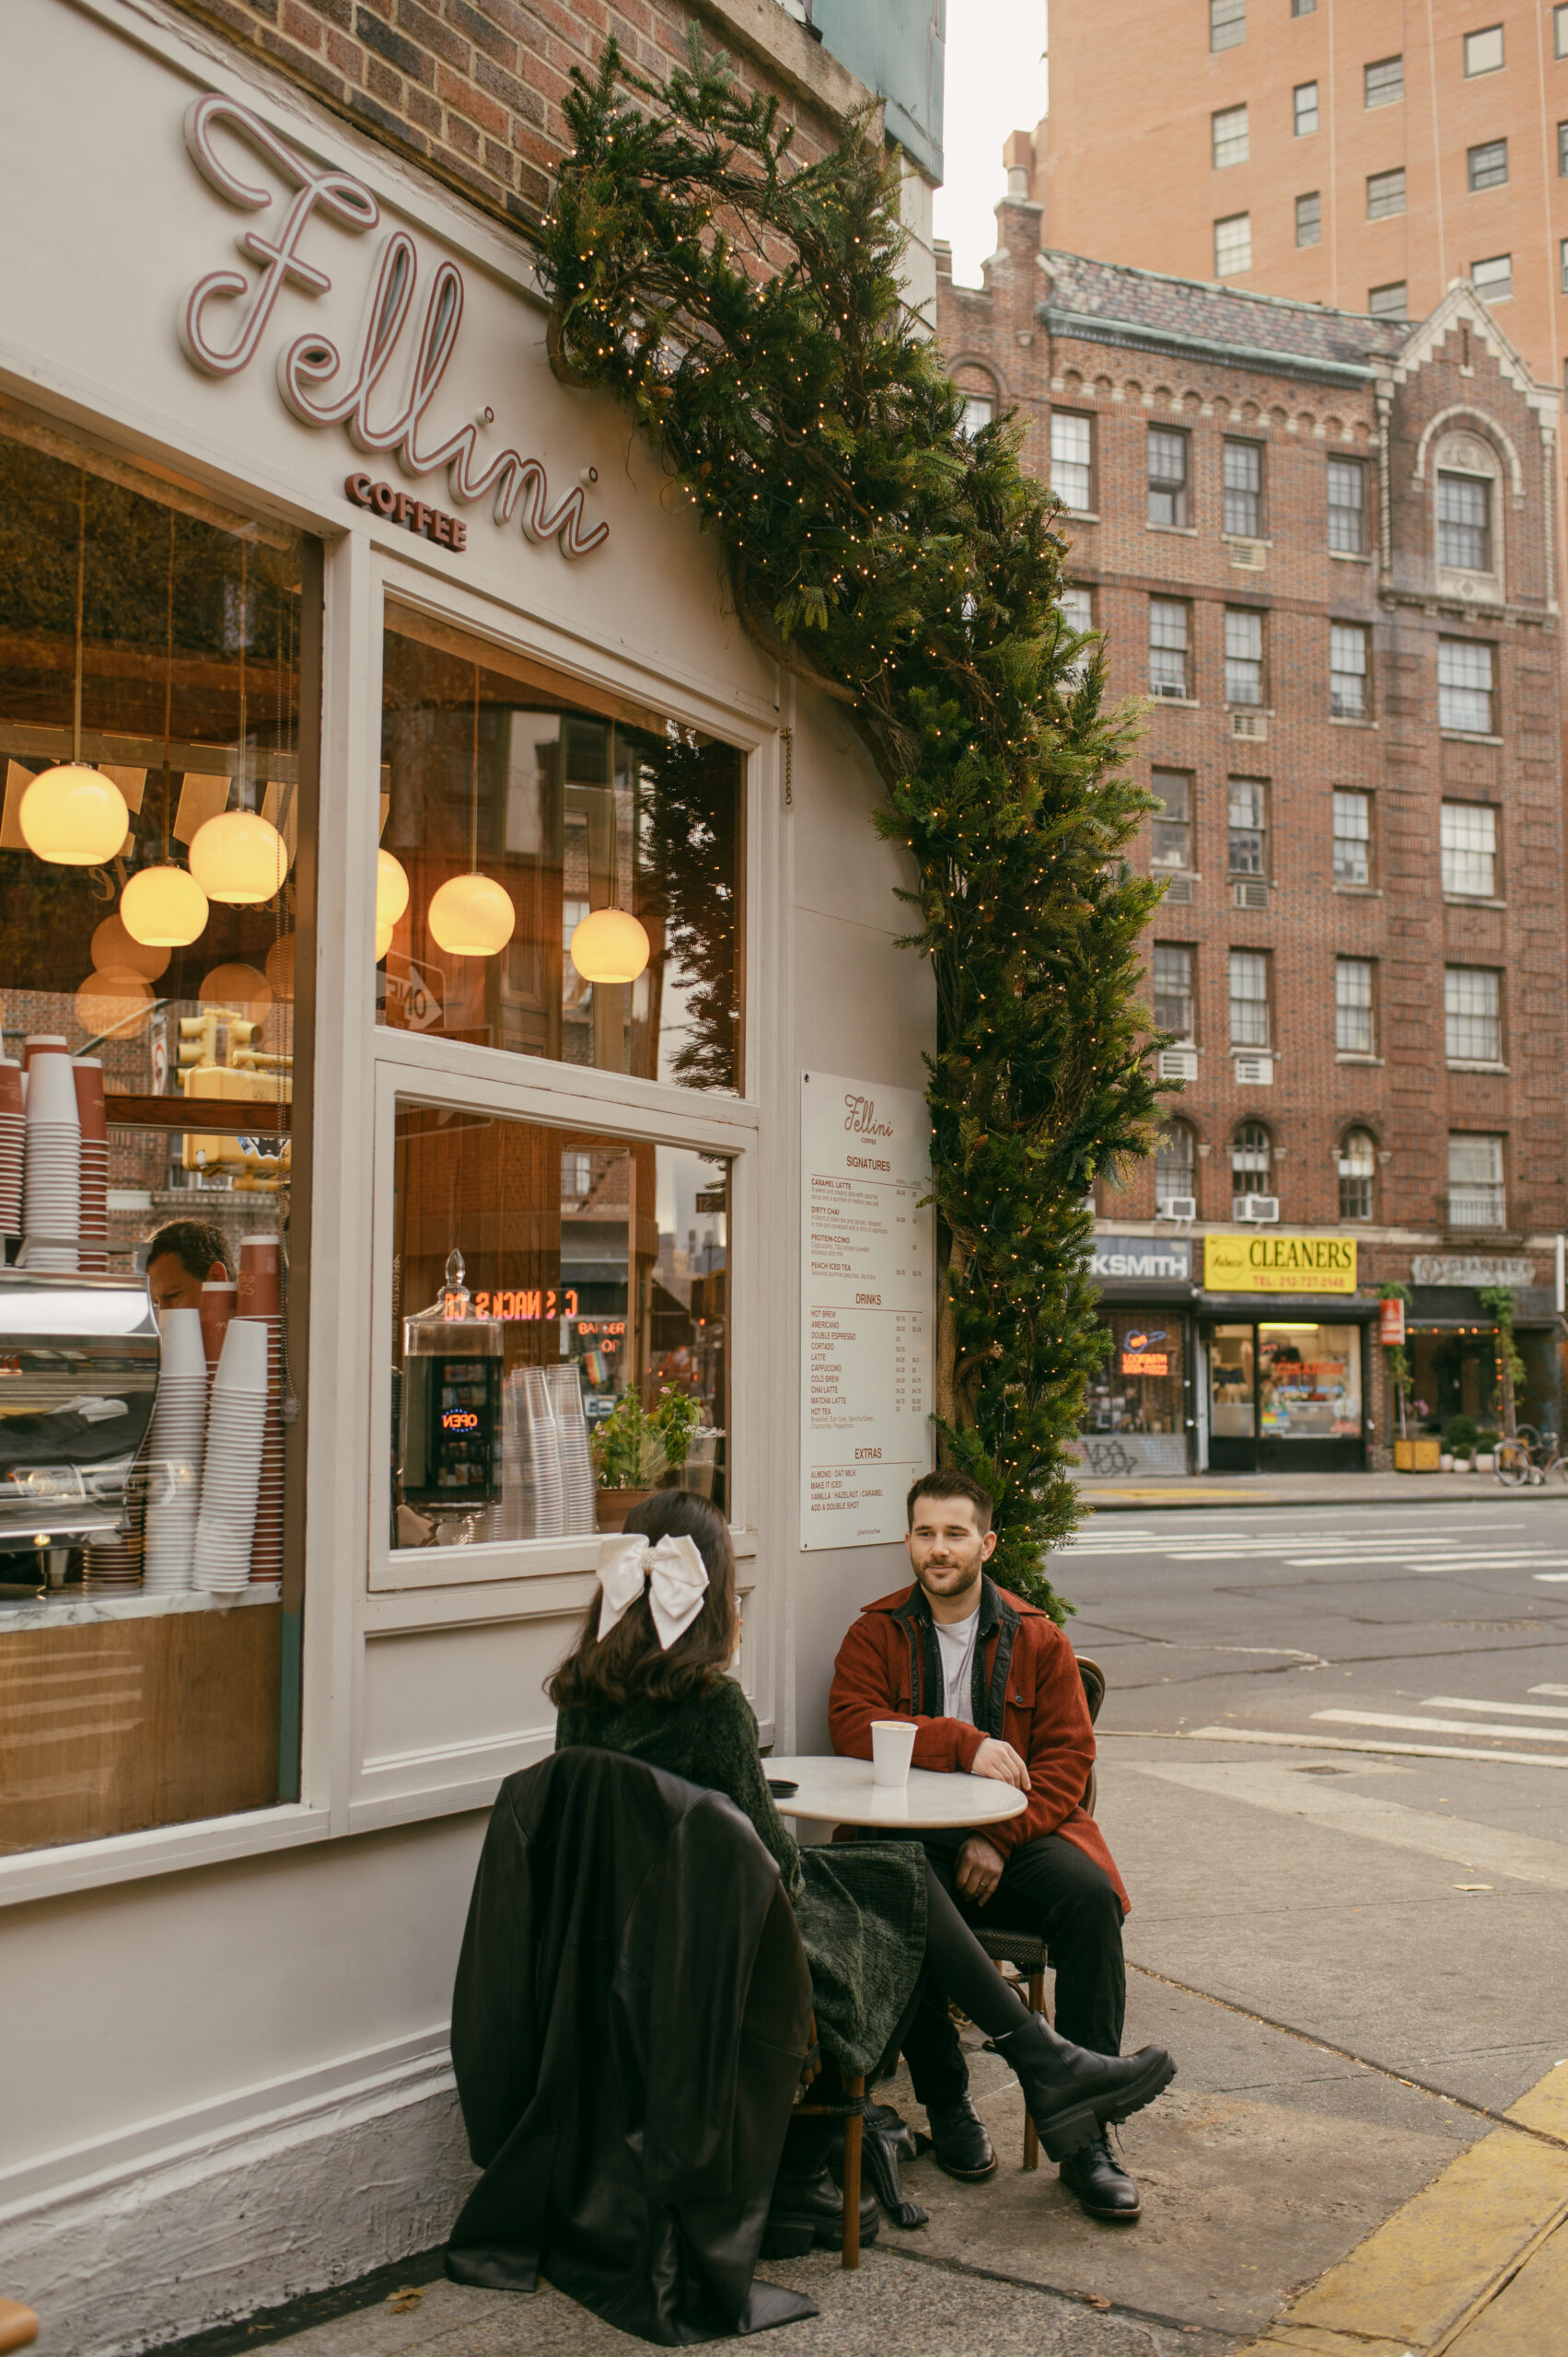 Fellini Coffee in West Village is a 16 square footage coffee shop on a triangular corner. A couple sits outside sipping coffee during their photoshoot.